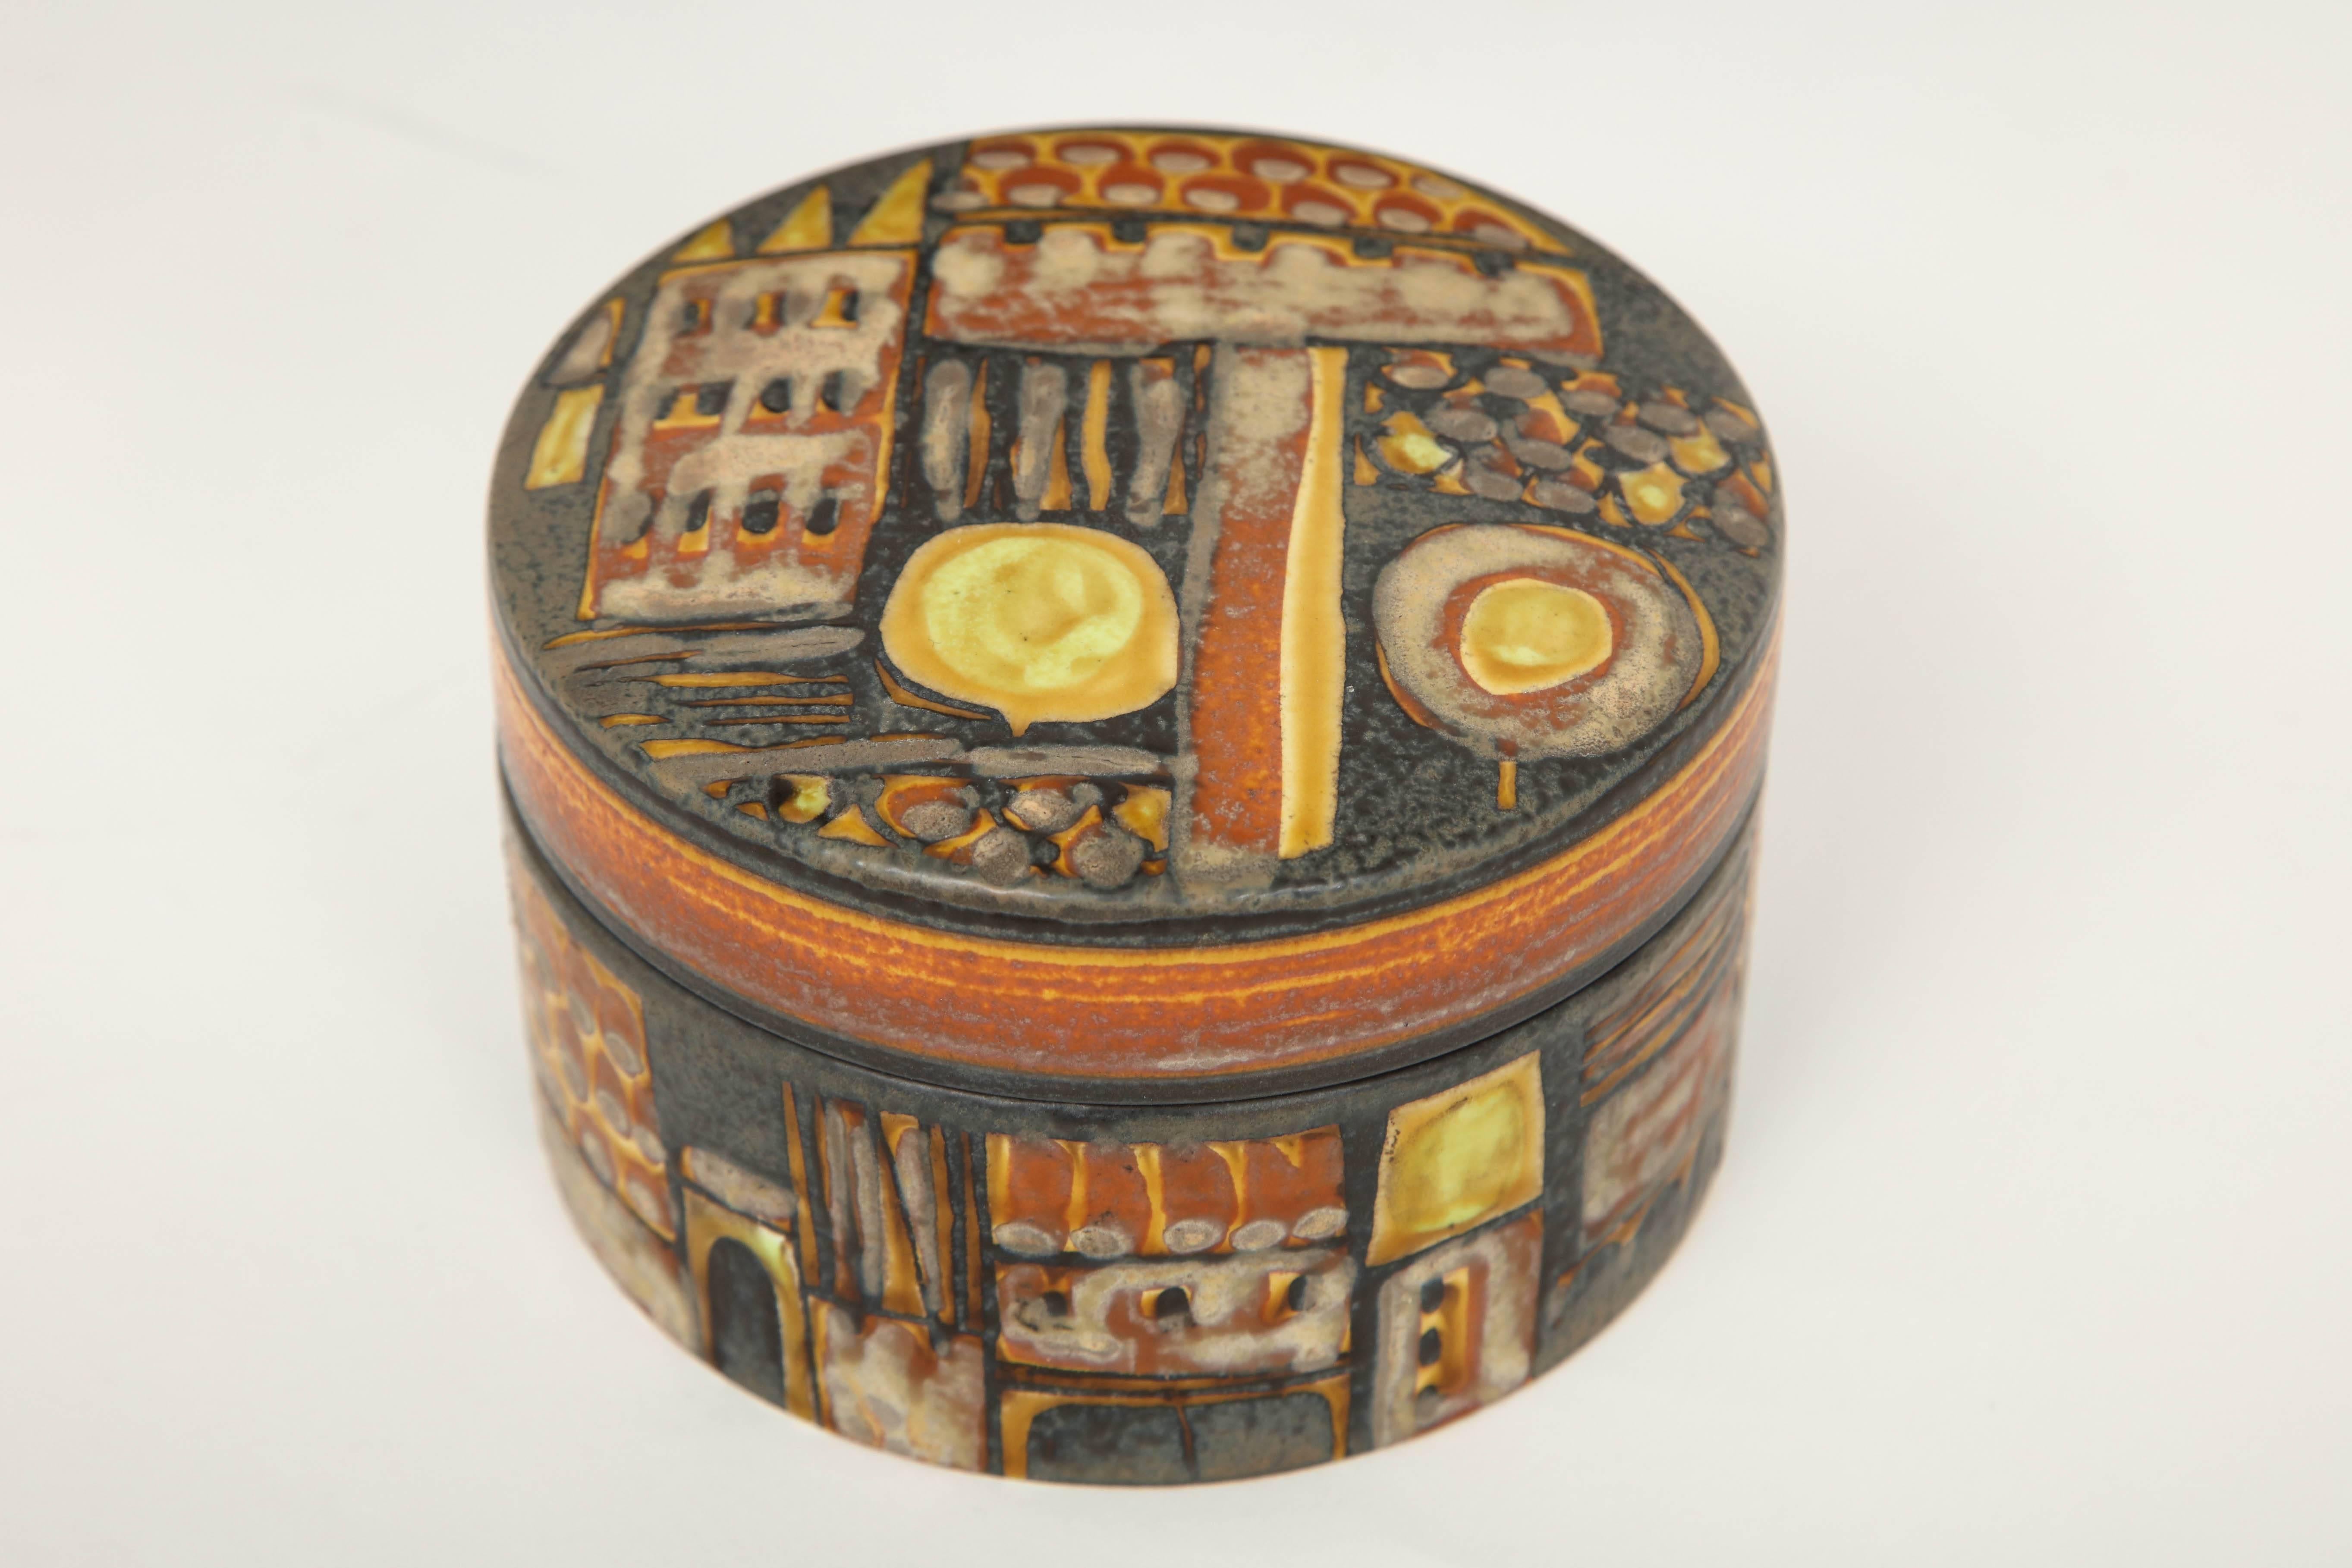 Beautiful colors abound in this Royal Copenhagen Faience Baca box in orange, yellow, chocolate and grey by Johanne Gerber. This cylinder lidded ceramic box was masterfully created with an abstract design circling the box and is perfect for any